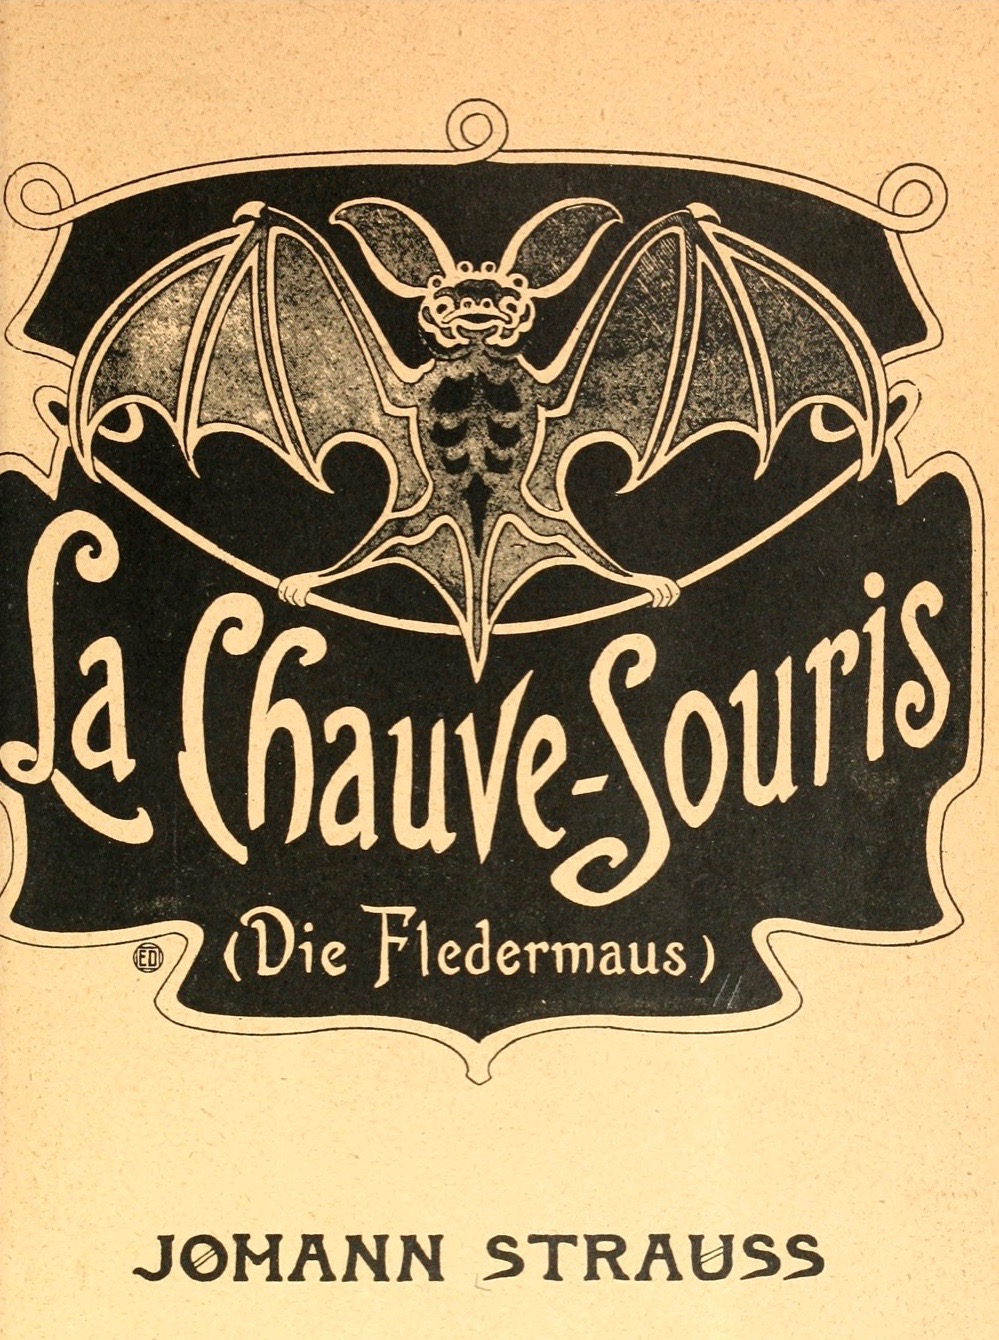 Title page of the opera Die Fledermaus. Artistic illustration of a bat with text La Chave Souris Die Fledermaus.